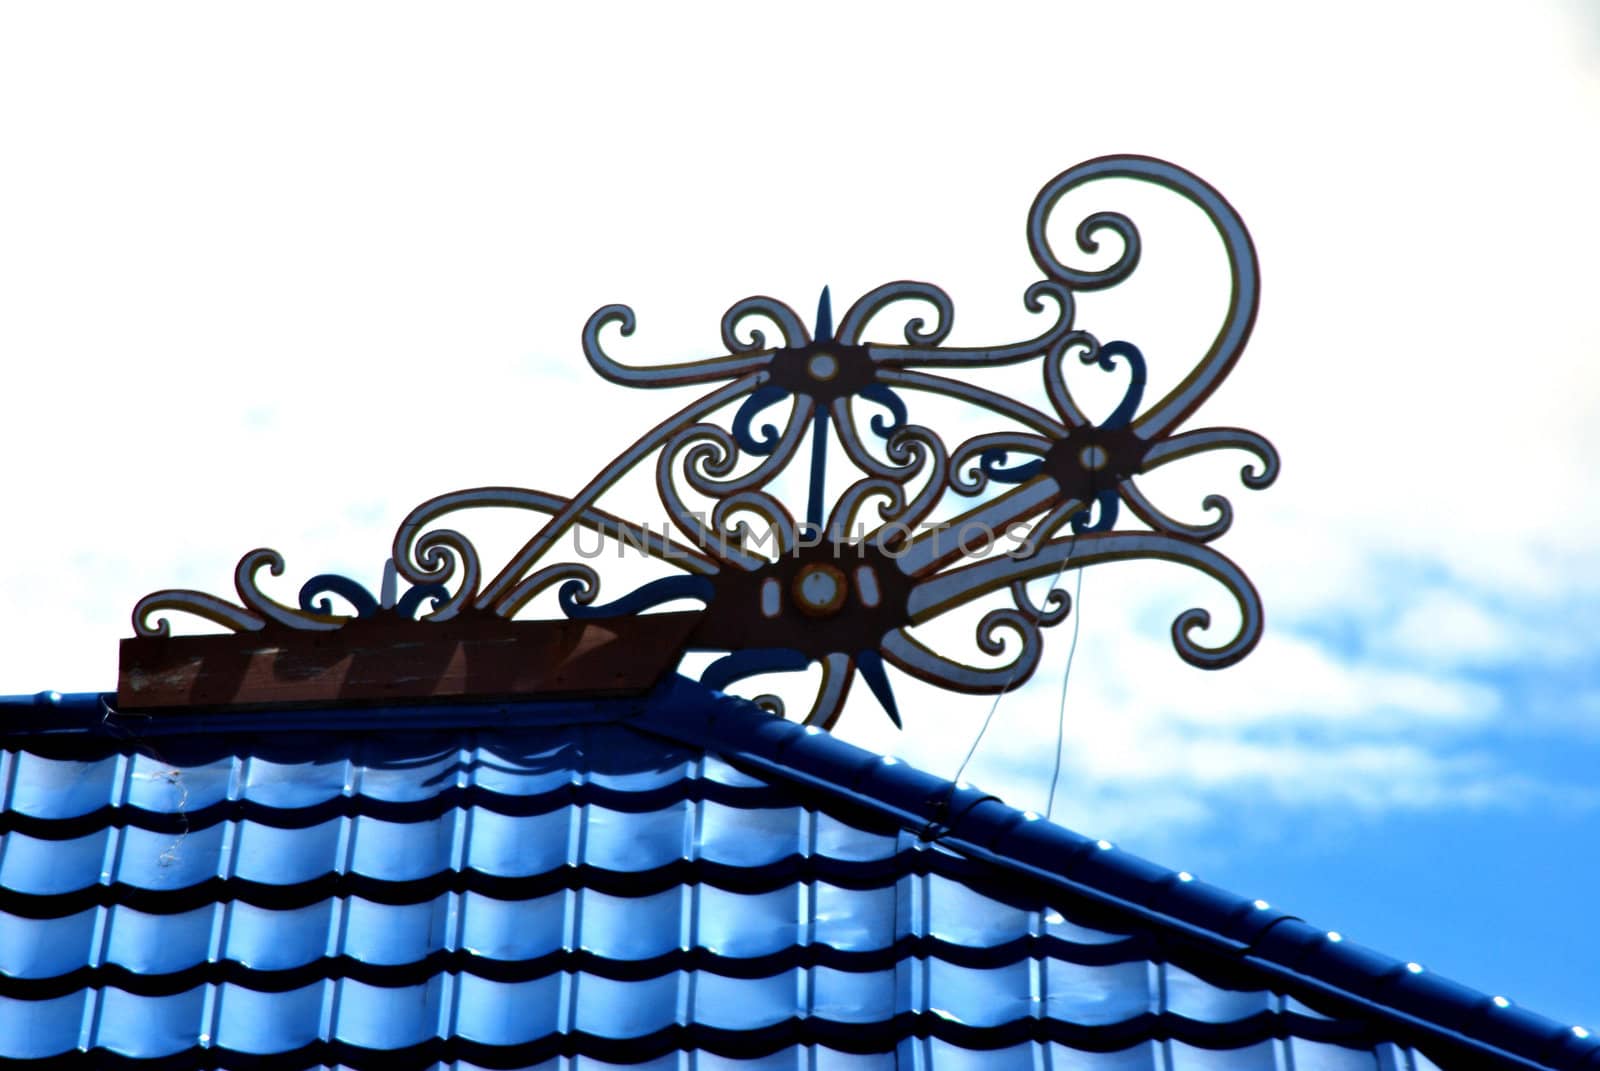 borneo traditional tribal carvings on the roof top of buildings